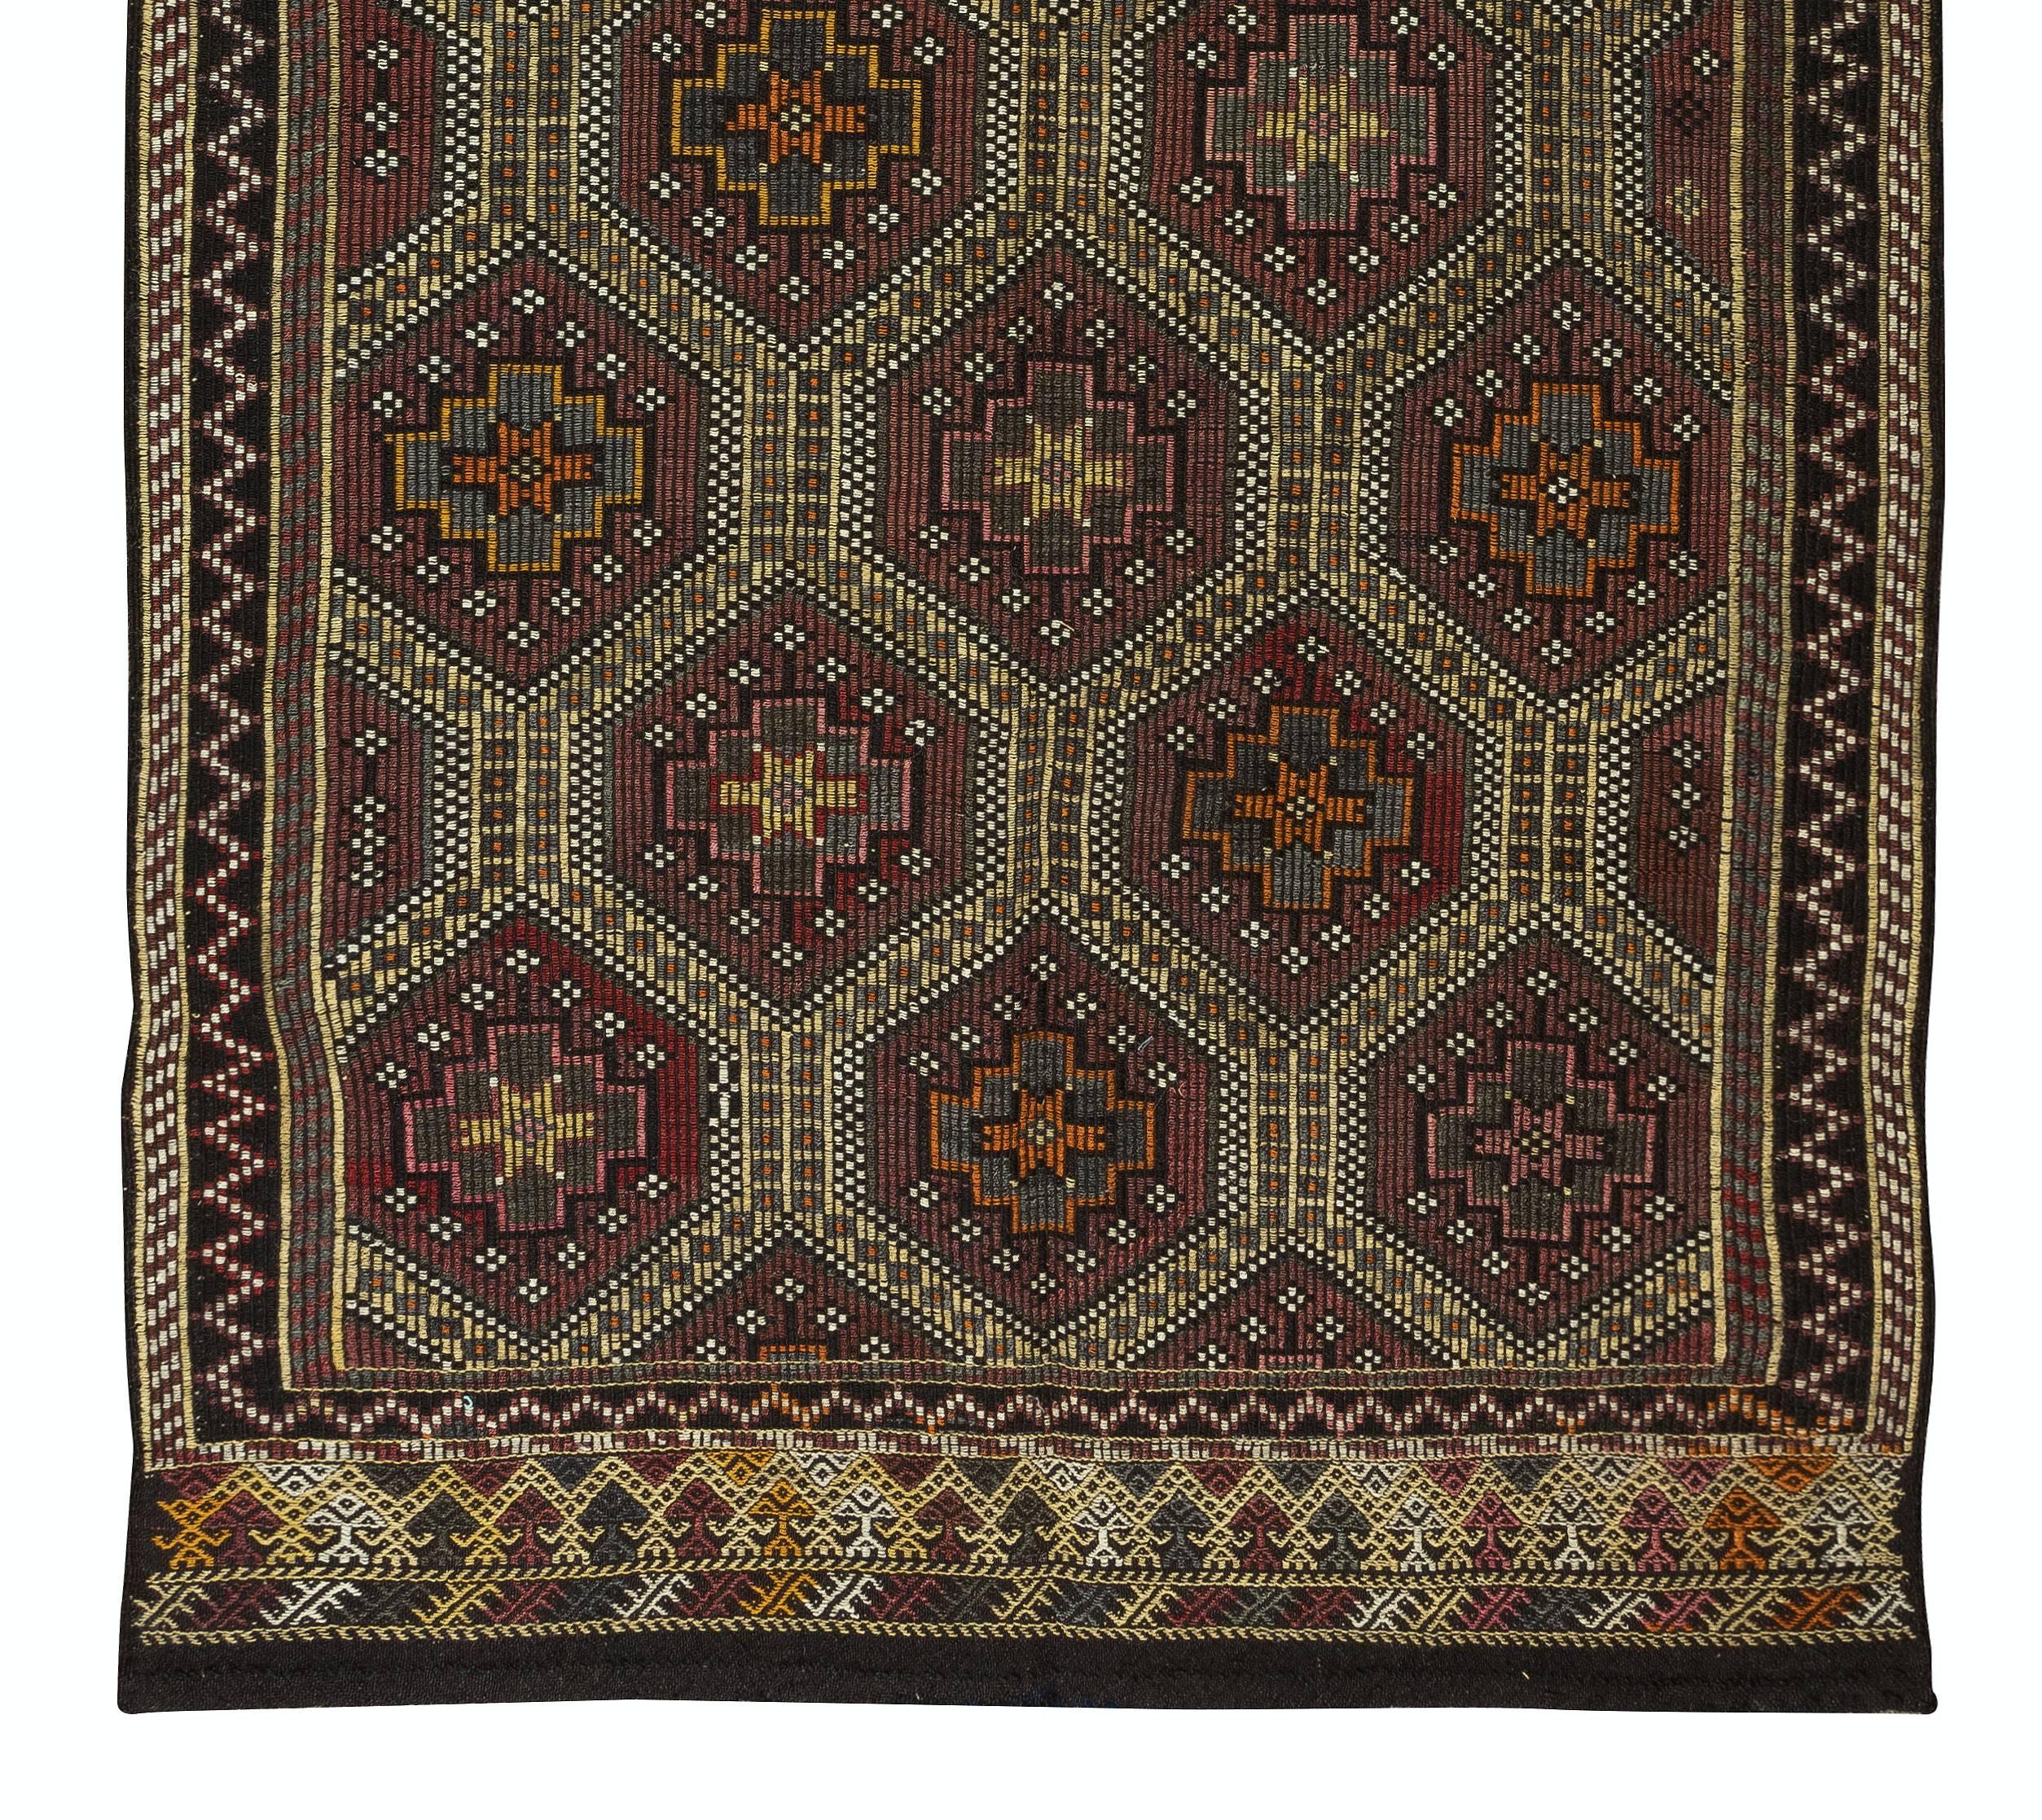 20th Century Central Anatolian Jajim Kilim, Vintage Hand-Woven Rug Made of Wool For Sale